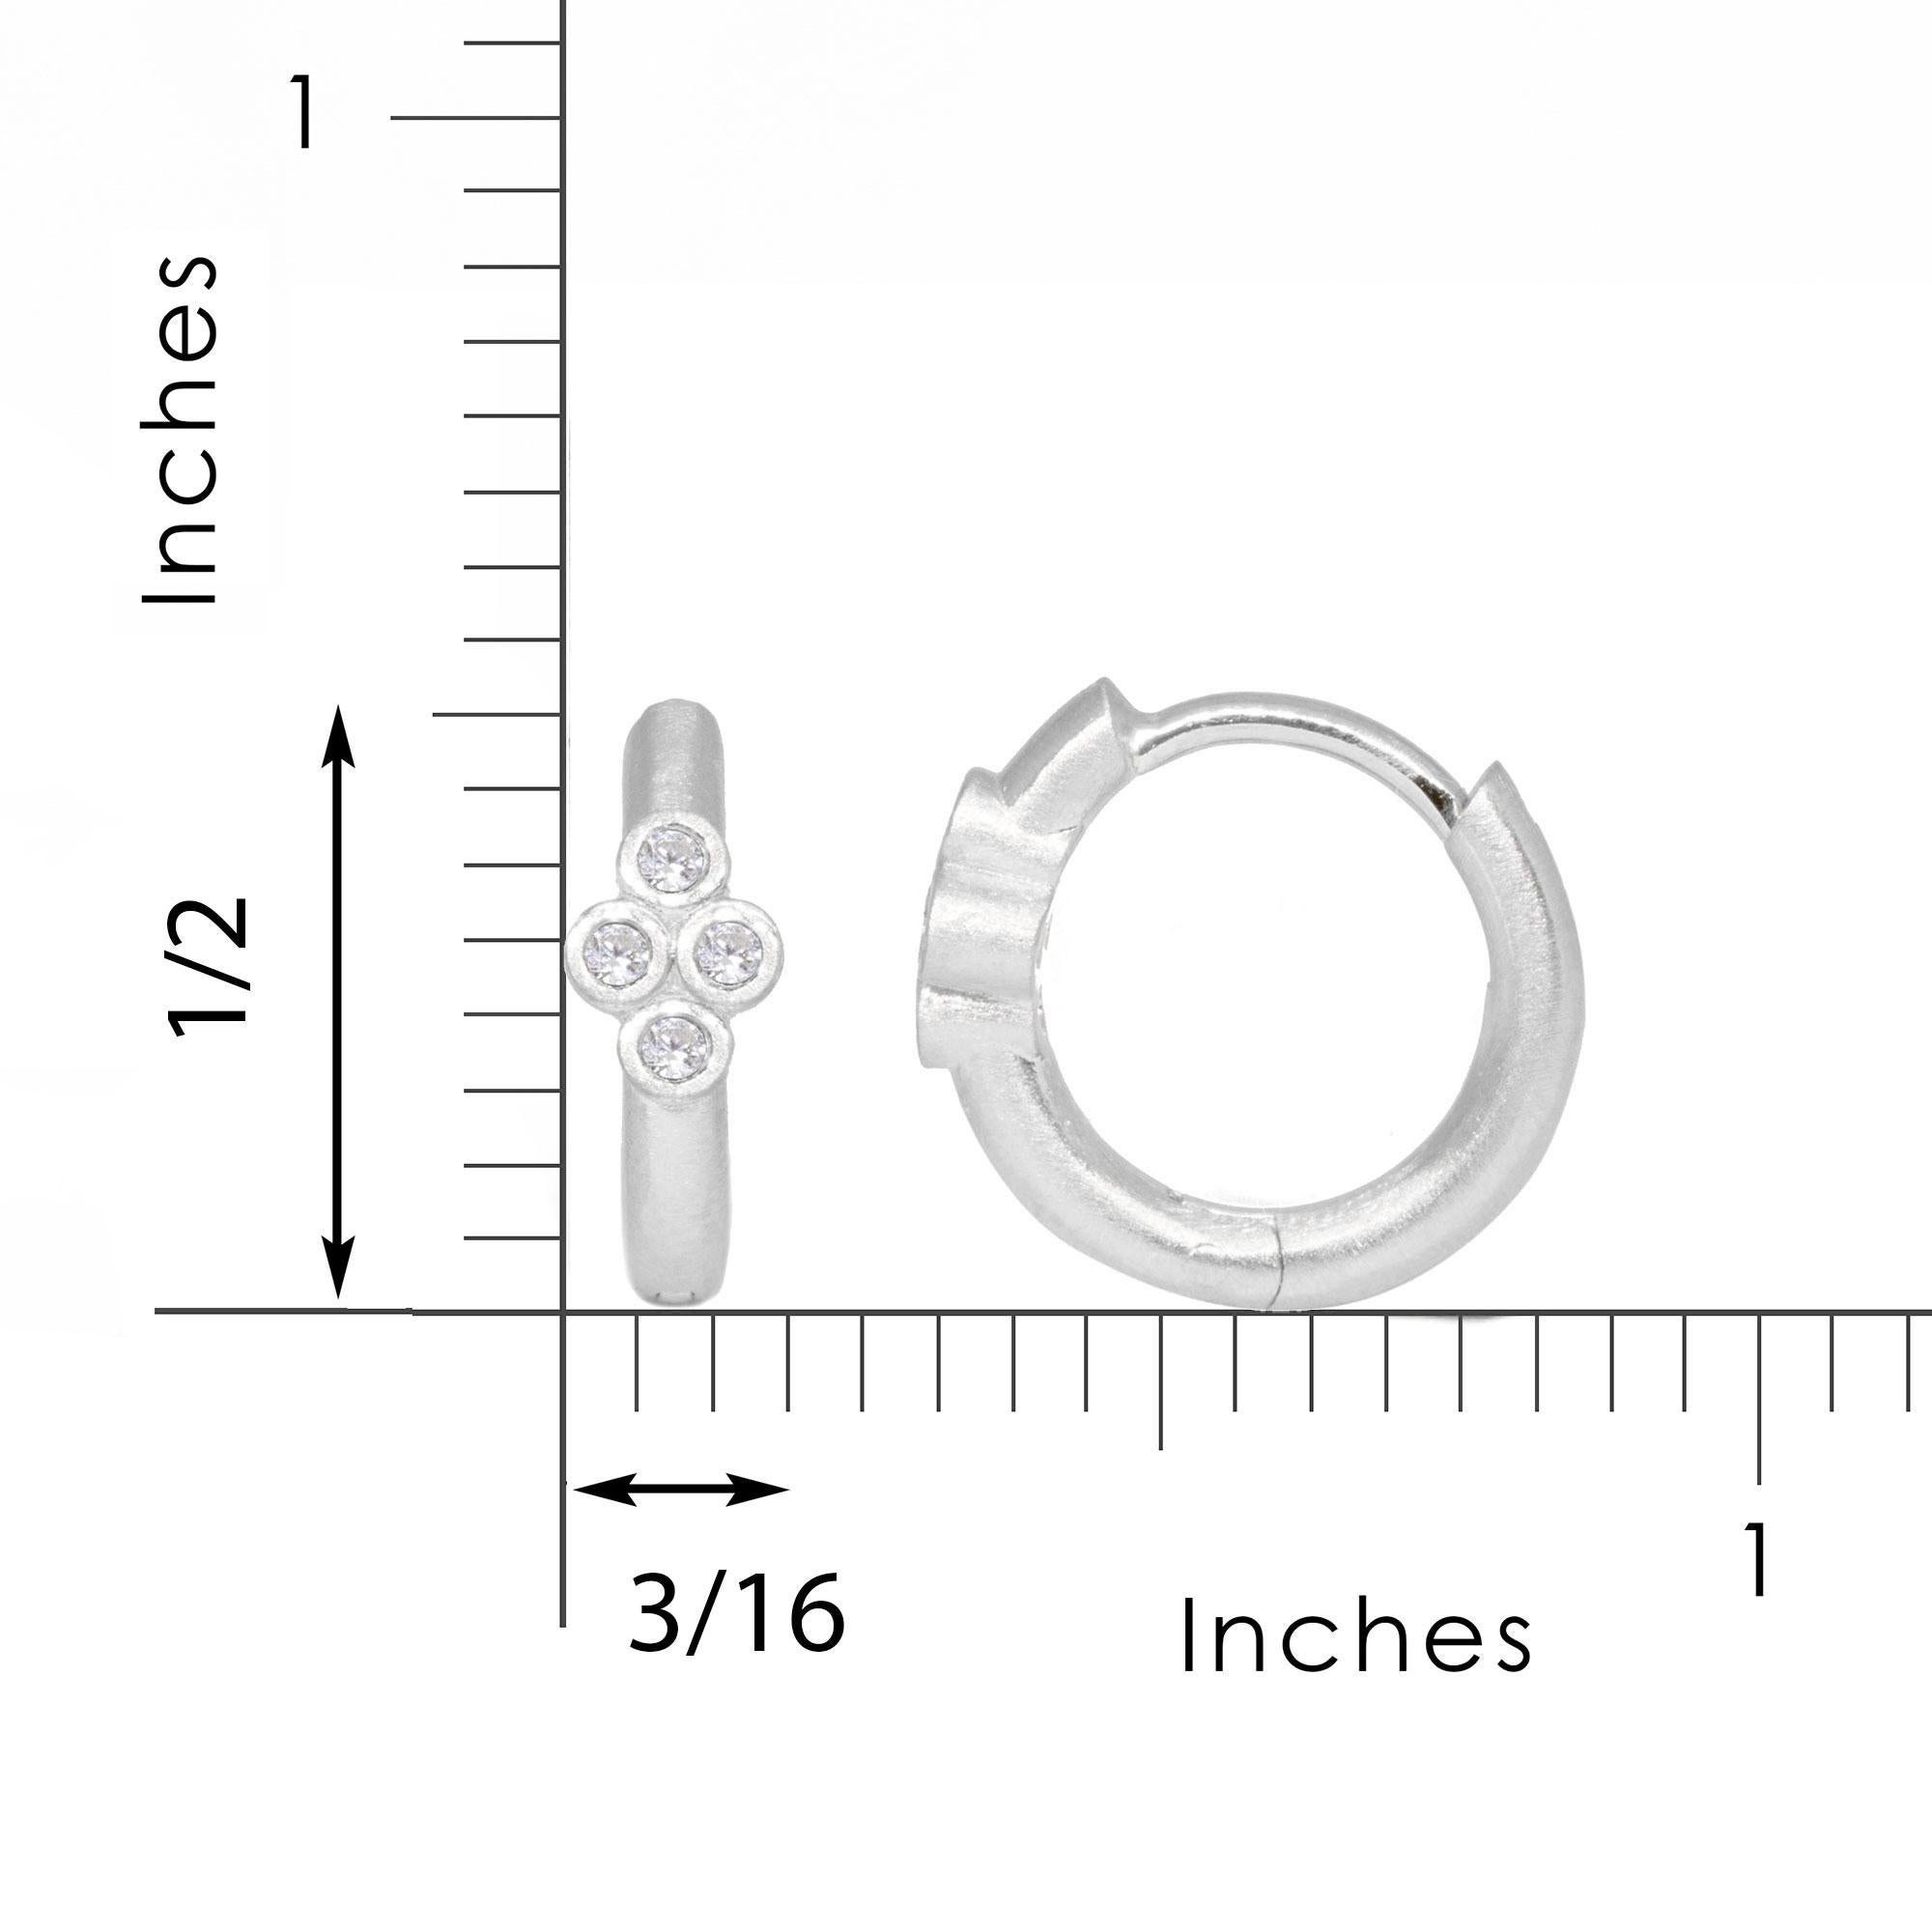 Details
Earrings Information

Metal: 14K Gold
Dimensions: 13mm
Metal Weight (g): 2.6-2.8
Diamond Information

Shape: Round
Diamond Size: 1.2mm
Clarity: SI1
Total Carat Weight: 0.07
No. Of Diamonds: 8